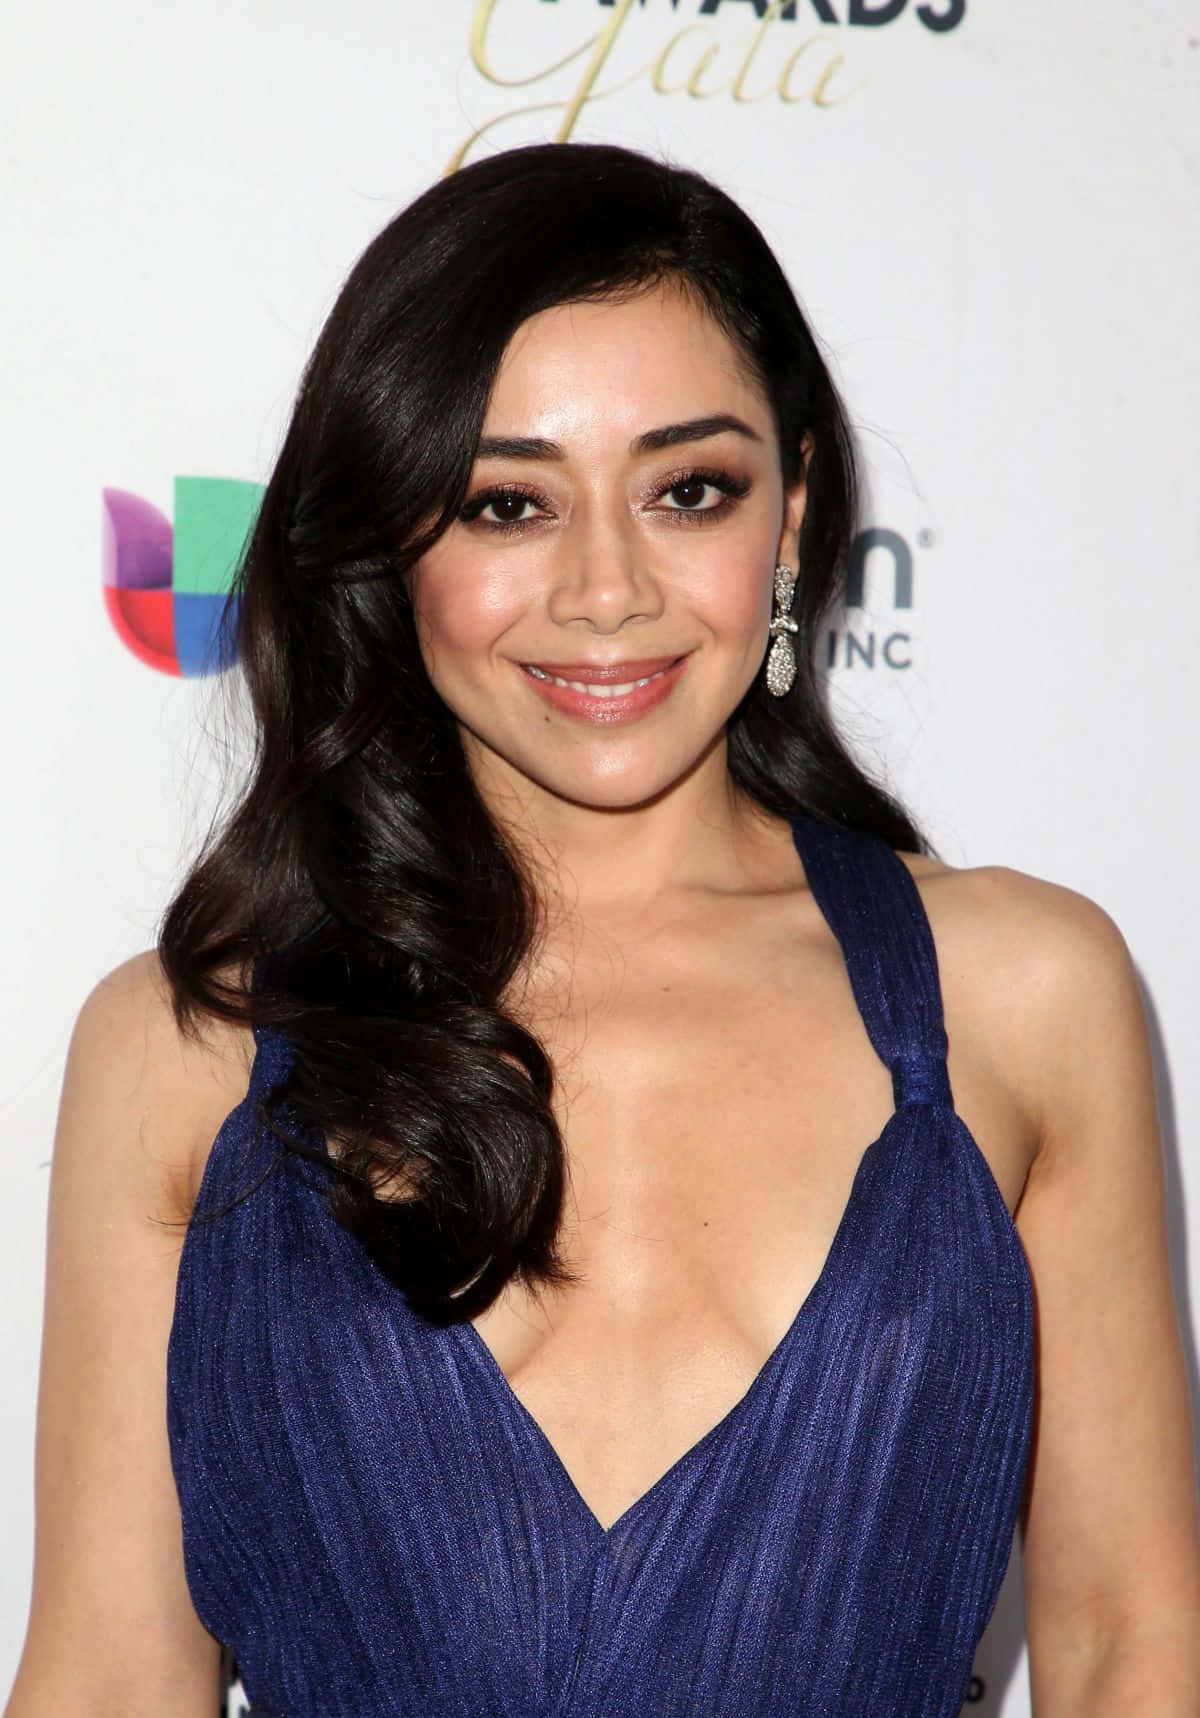 Aimee Garcia posing elegantly in a stylish outfit Wallpaper